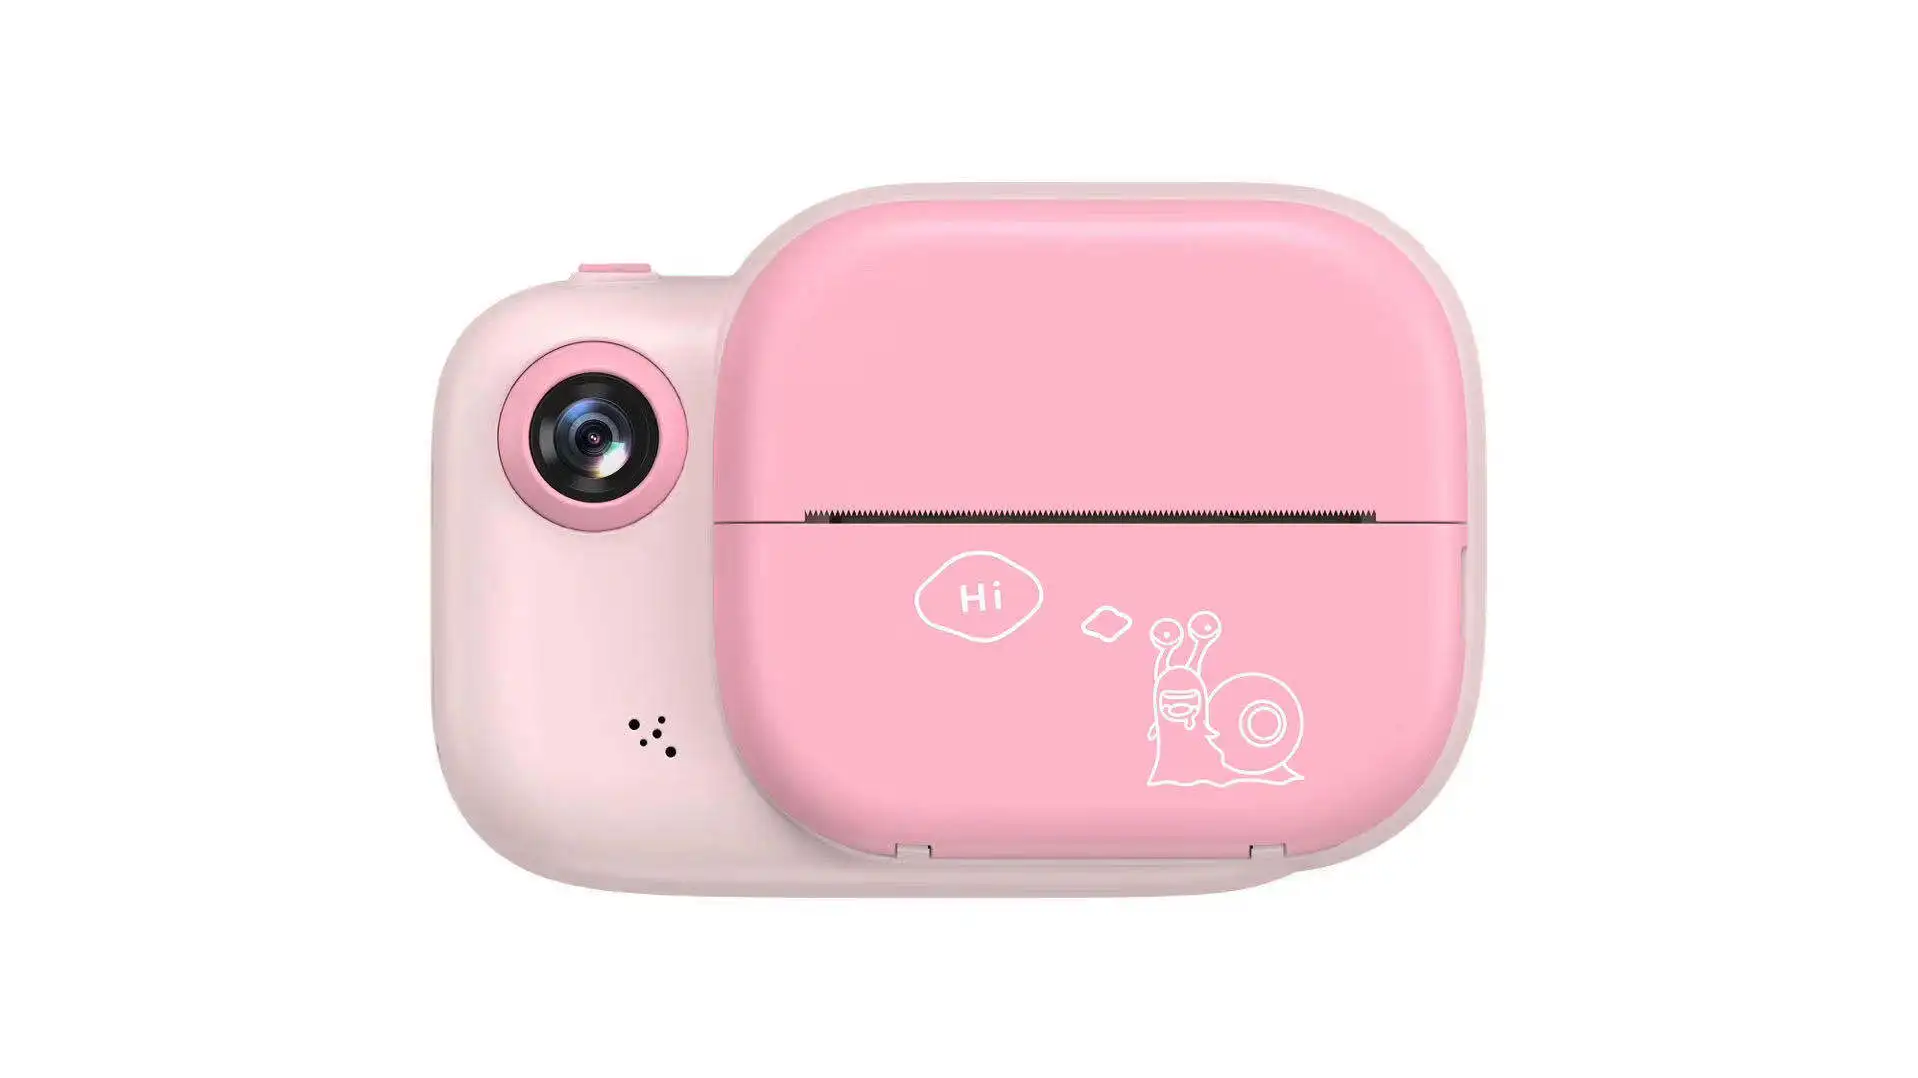 Mini Cartoon Photo Camera Toys 3 Inch HD Screen Childrens Digital Camera Video Recorder Camcorder Toys for Kids Girls Gift